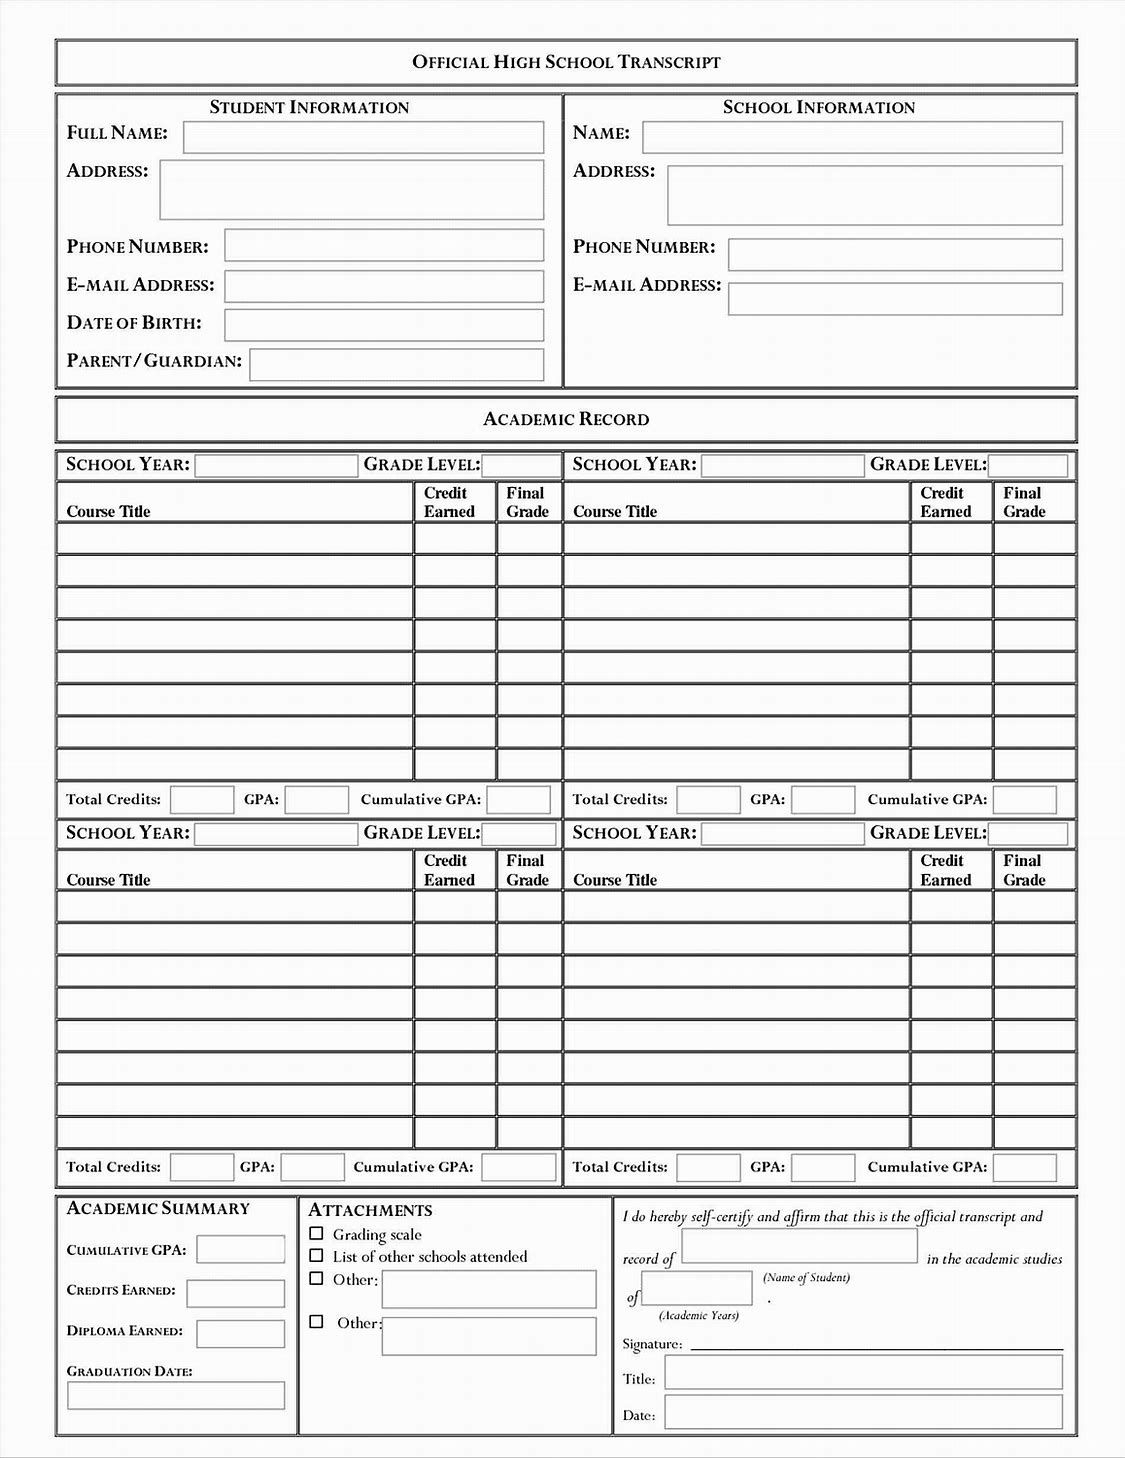 Image Result For Middle School Transcript Template | High With Homeschool Report Card Template Middle School